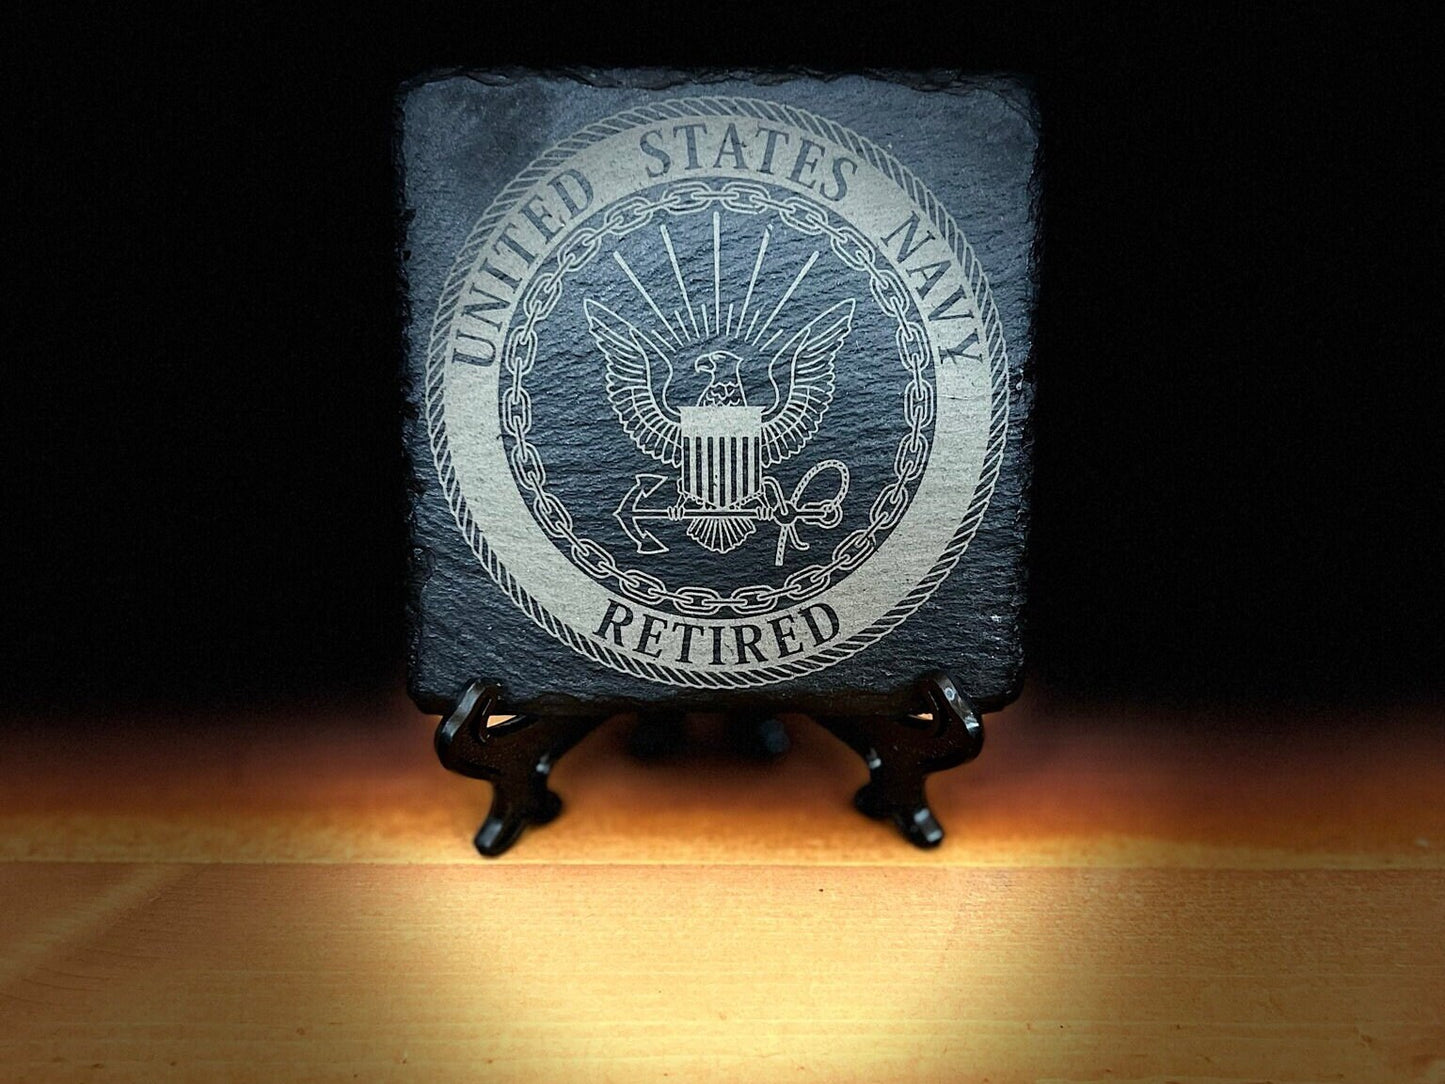 Laser Engraved Slate Coaster with the United States Navy Retired Seal